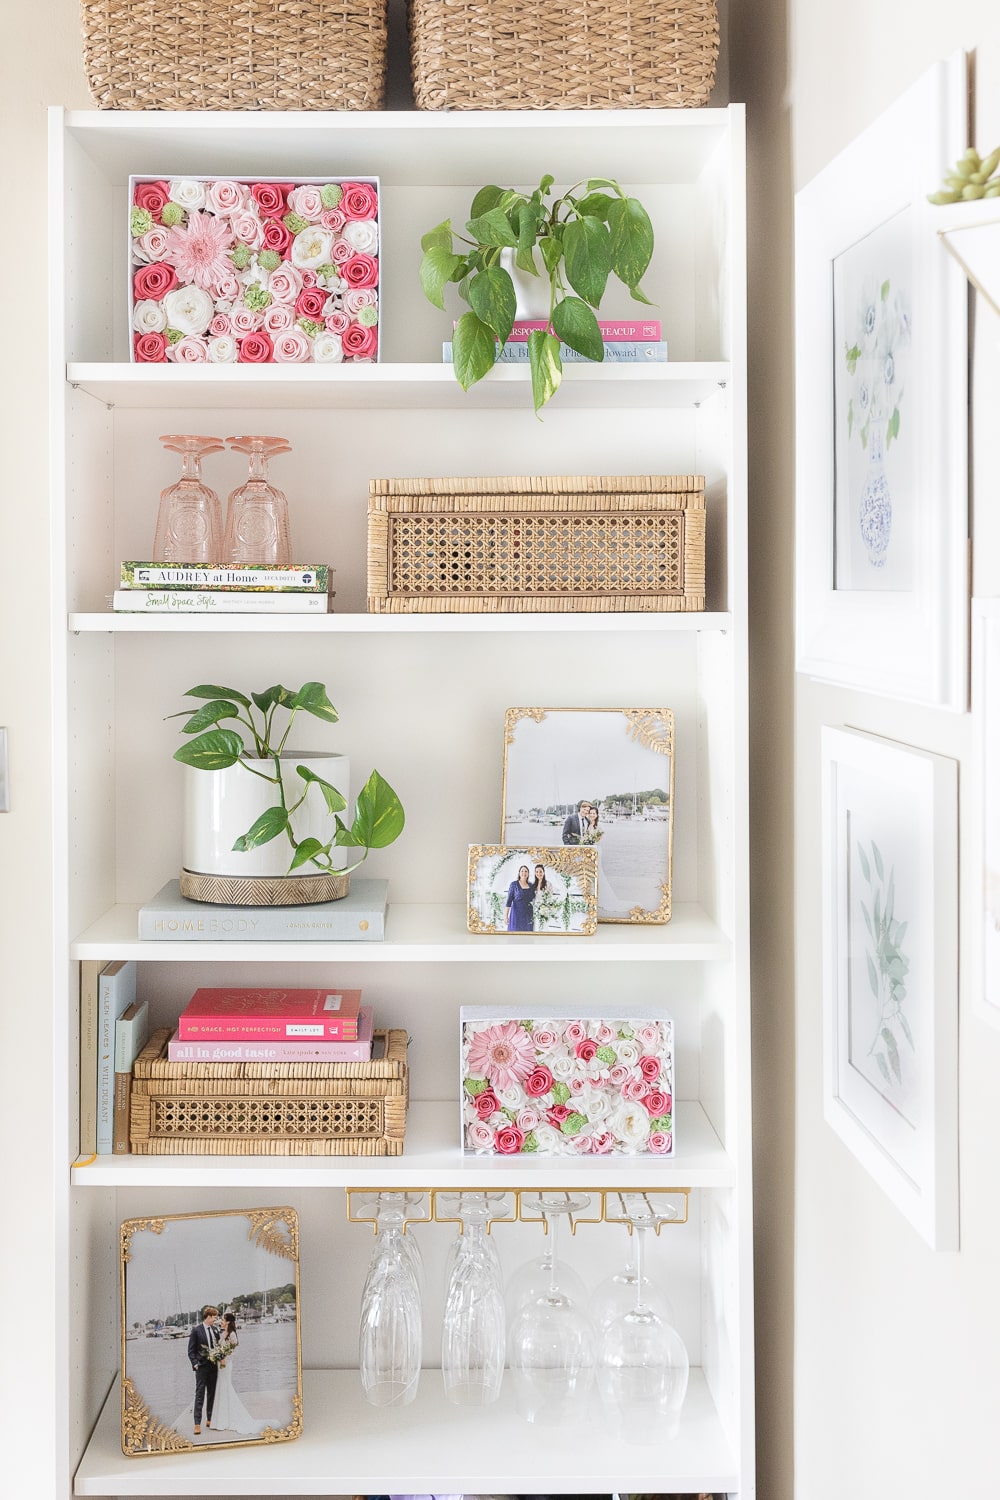 Blogger Stephanie Ziajka shares colorful bookshelf styling ideas for summer on Diary of a Debutante